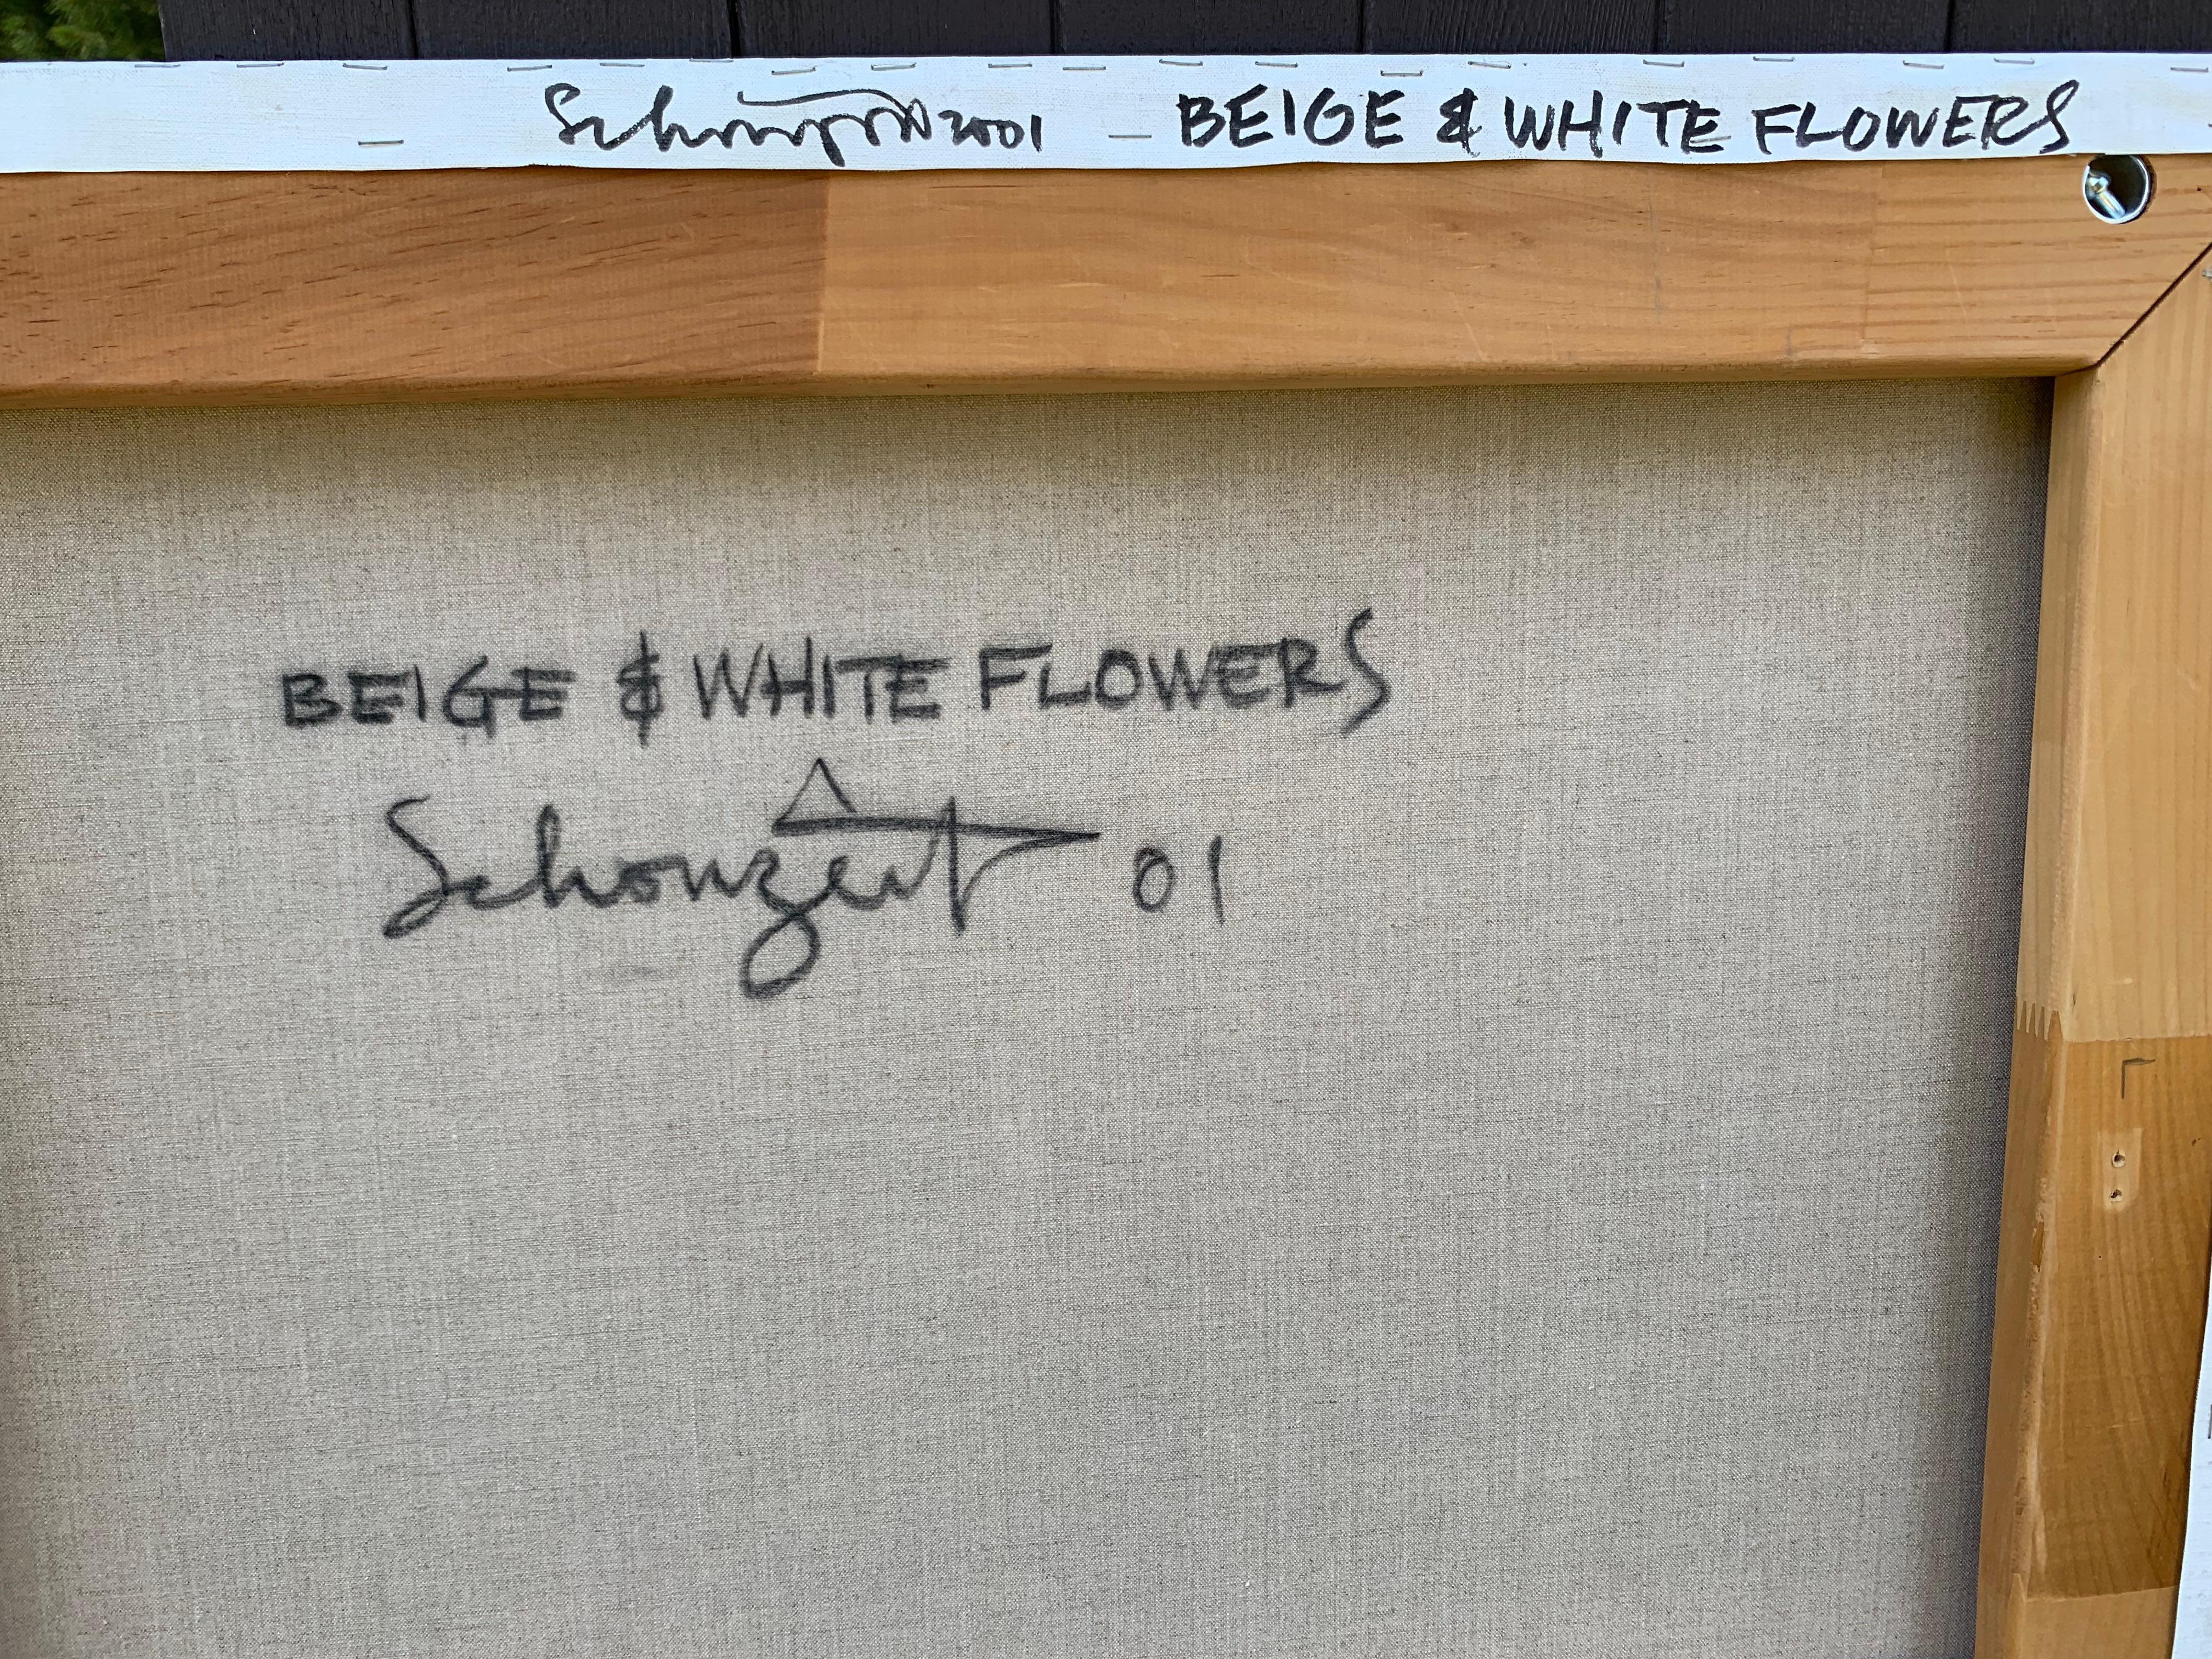 Ben Schonzeit (b.1942). Beige & White Flowers, 2001. Oil on linen, 46 x 62 inches. Signed, titled, dated on verso. Excellent, clean condition. Unframed.

A pioneer of the Photorealist movement, Ben Schonzeit has been recognized by the legendary art